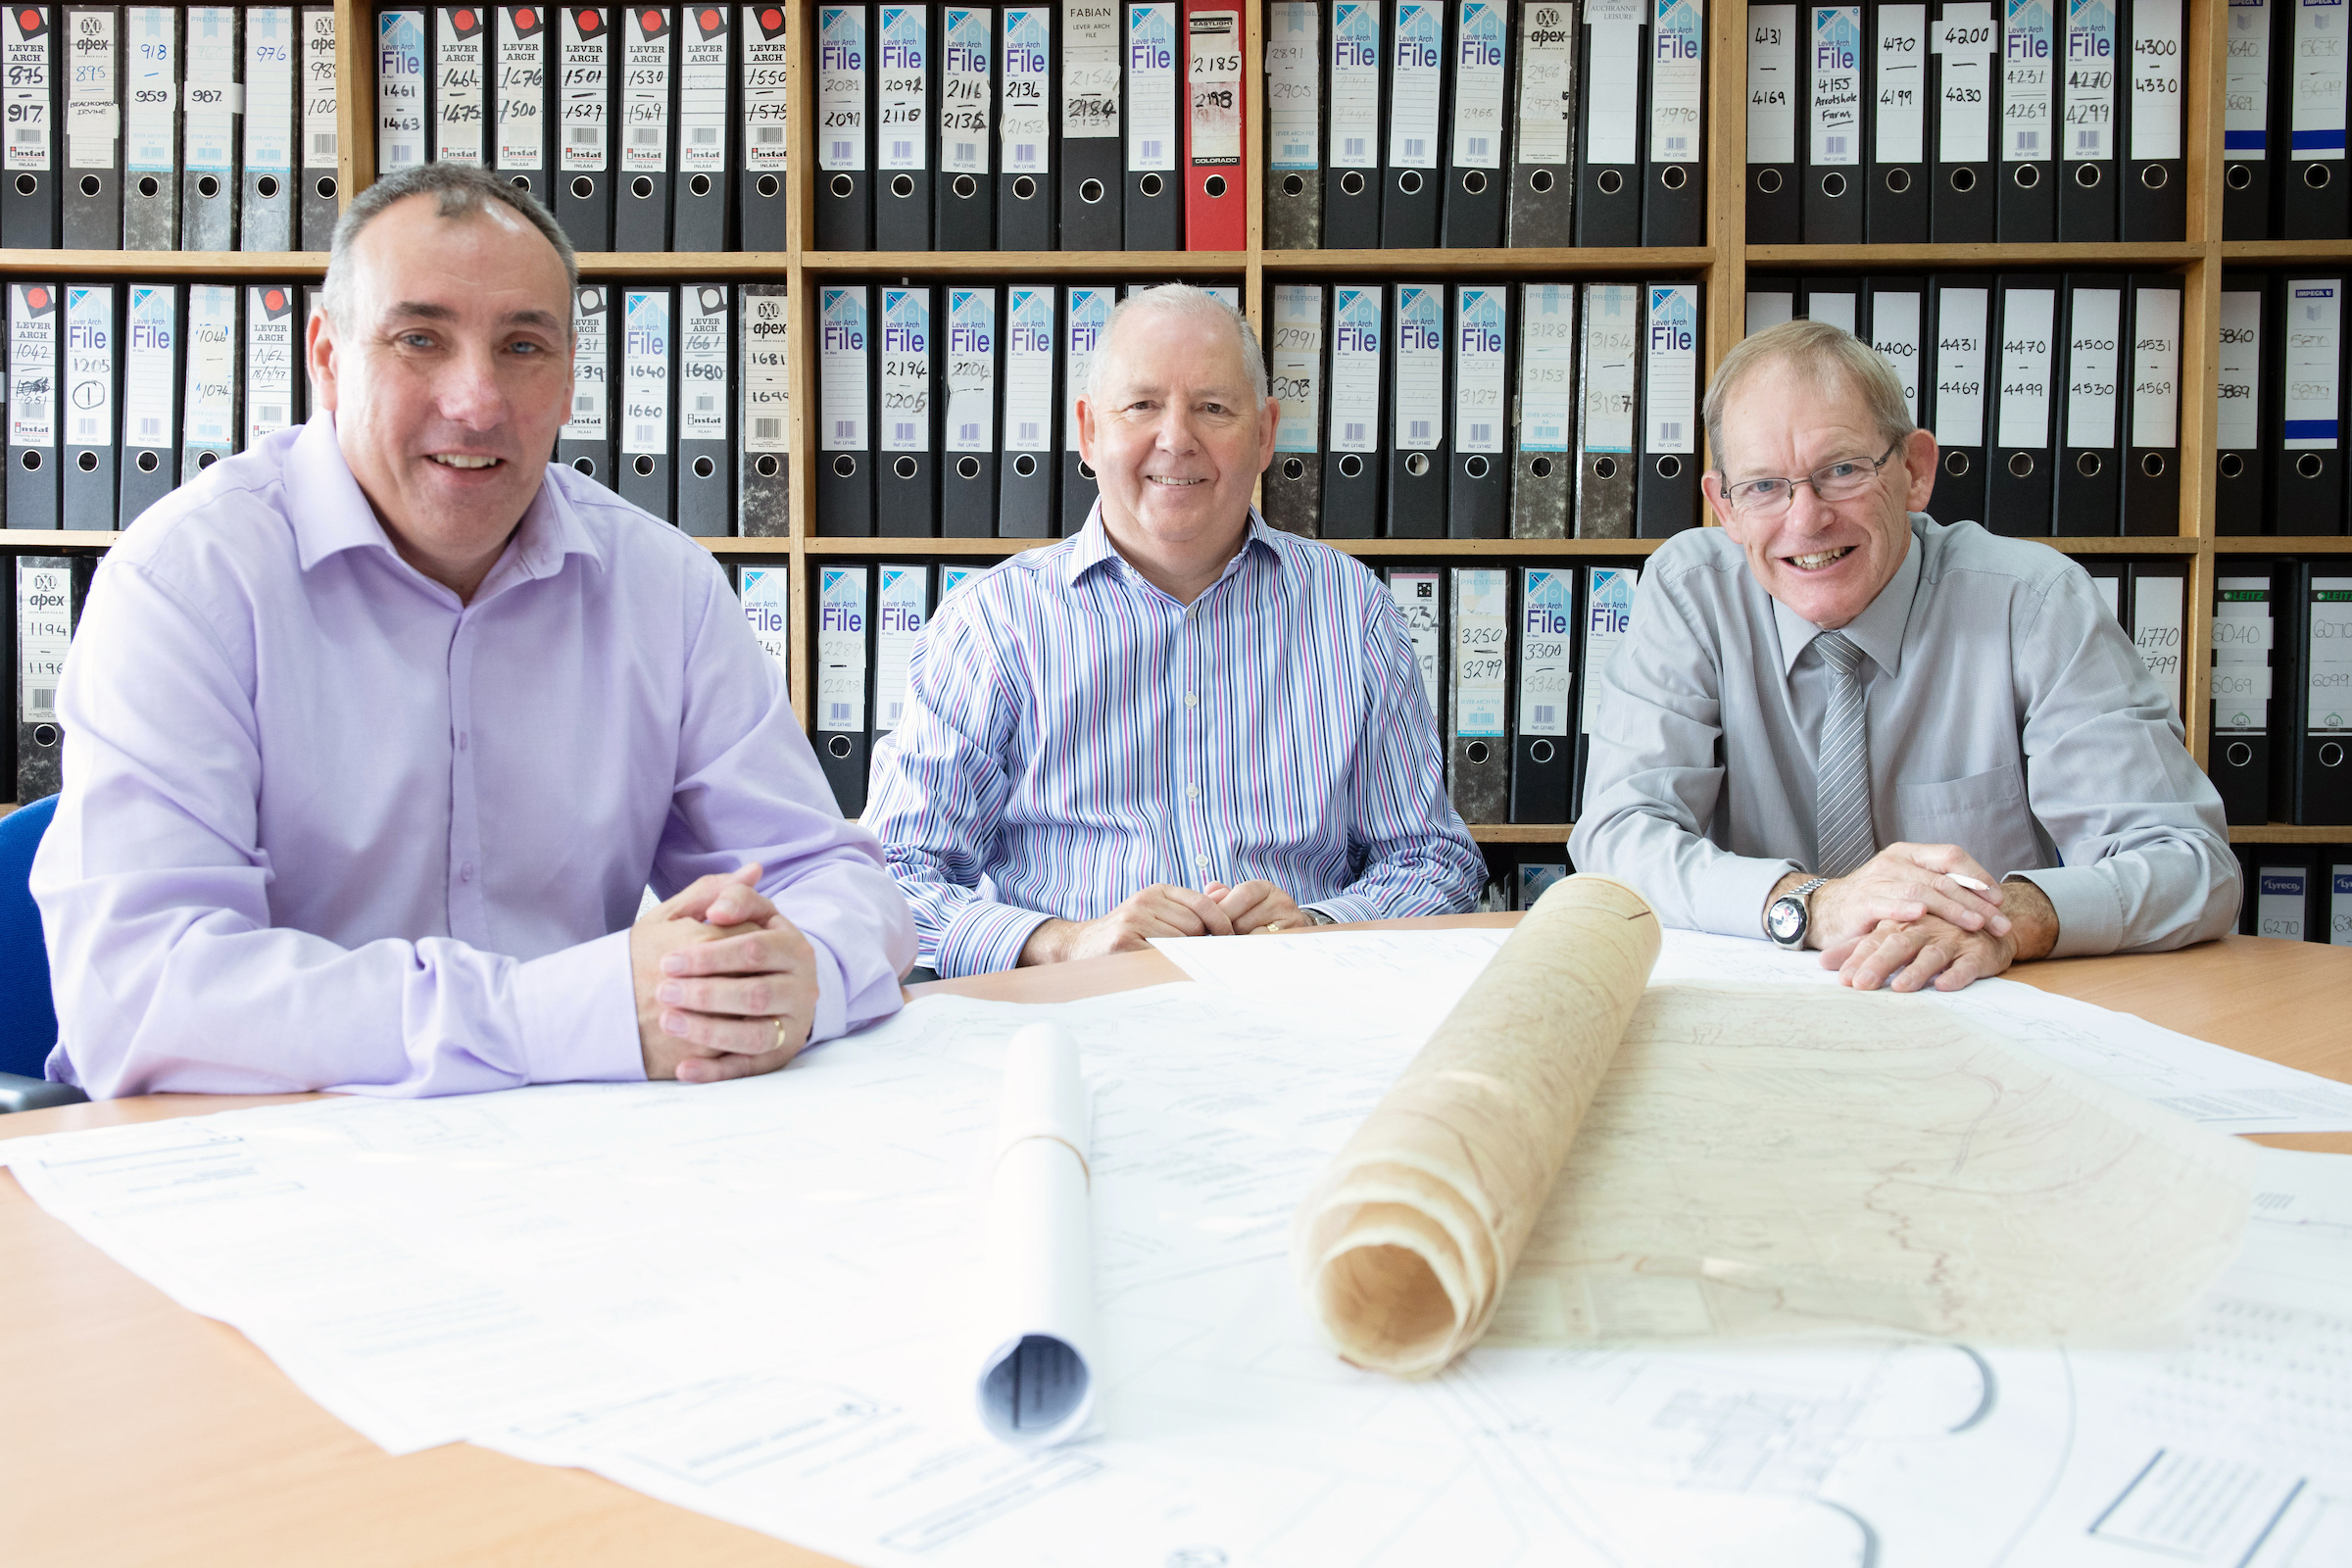 Grossarts Associates to move to employee ownership